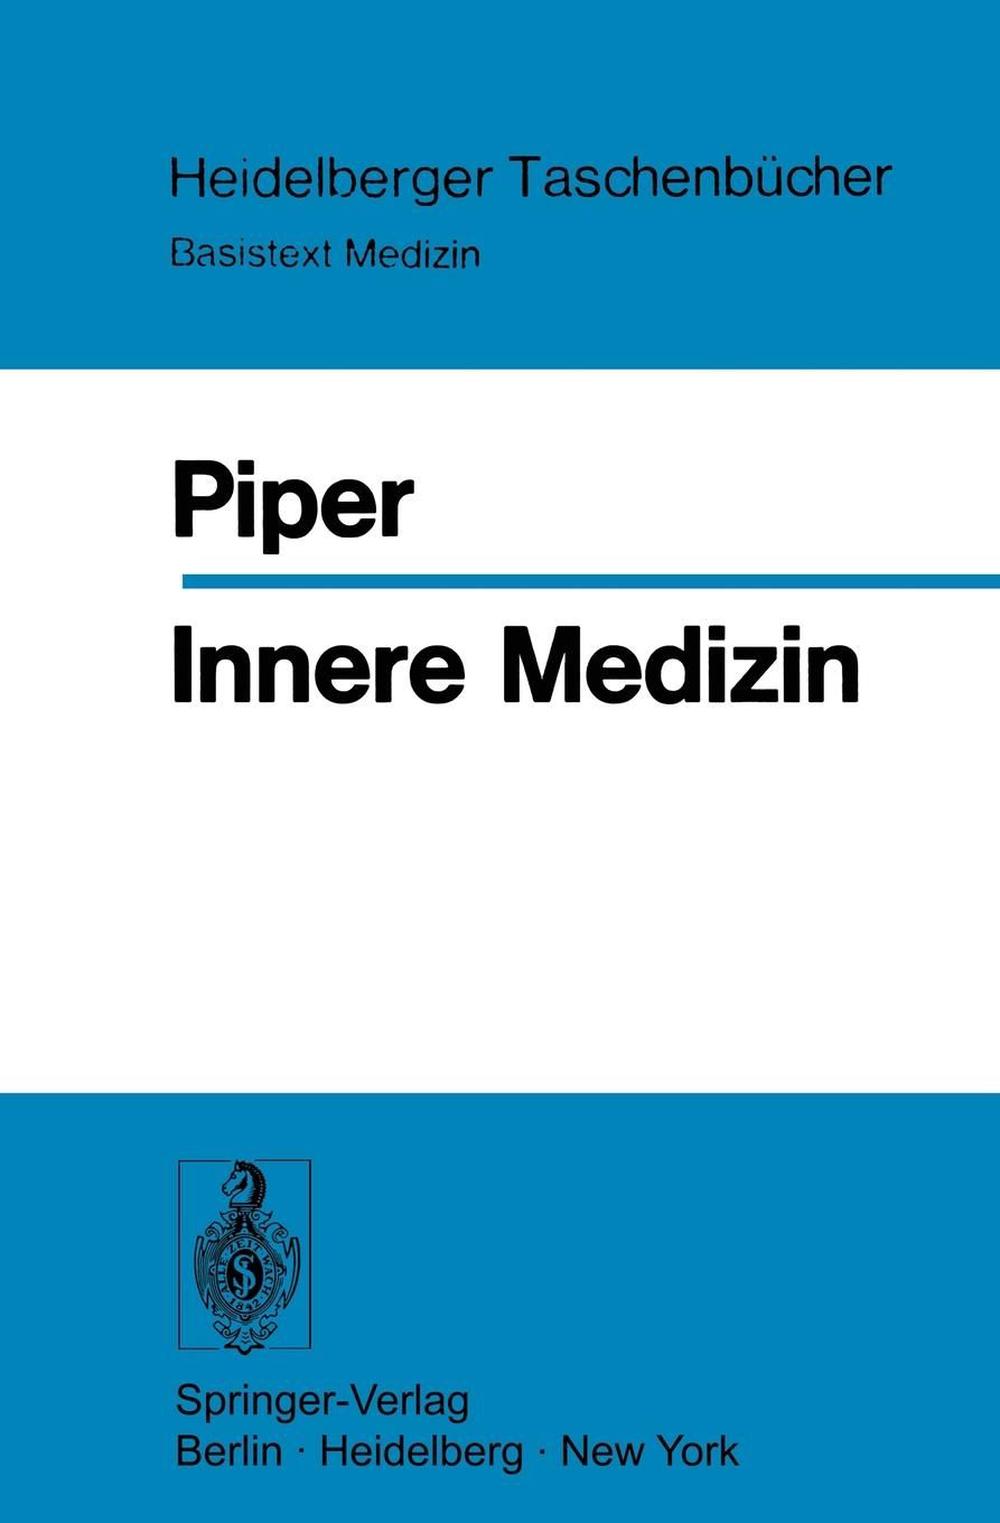 Innere Medizin by Wolfgang Piper (German) Paperback Book Free Shipping